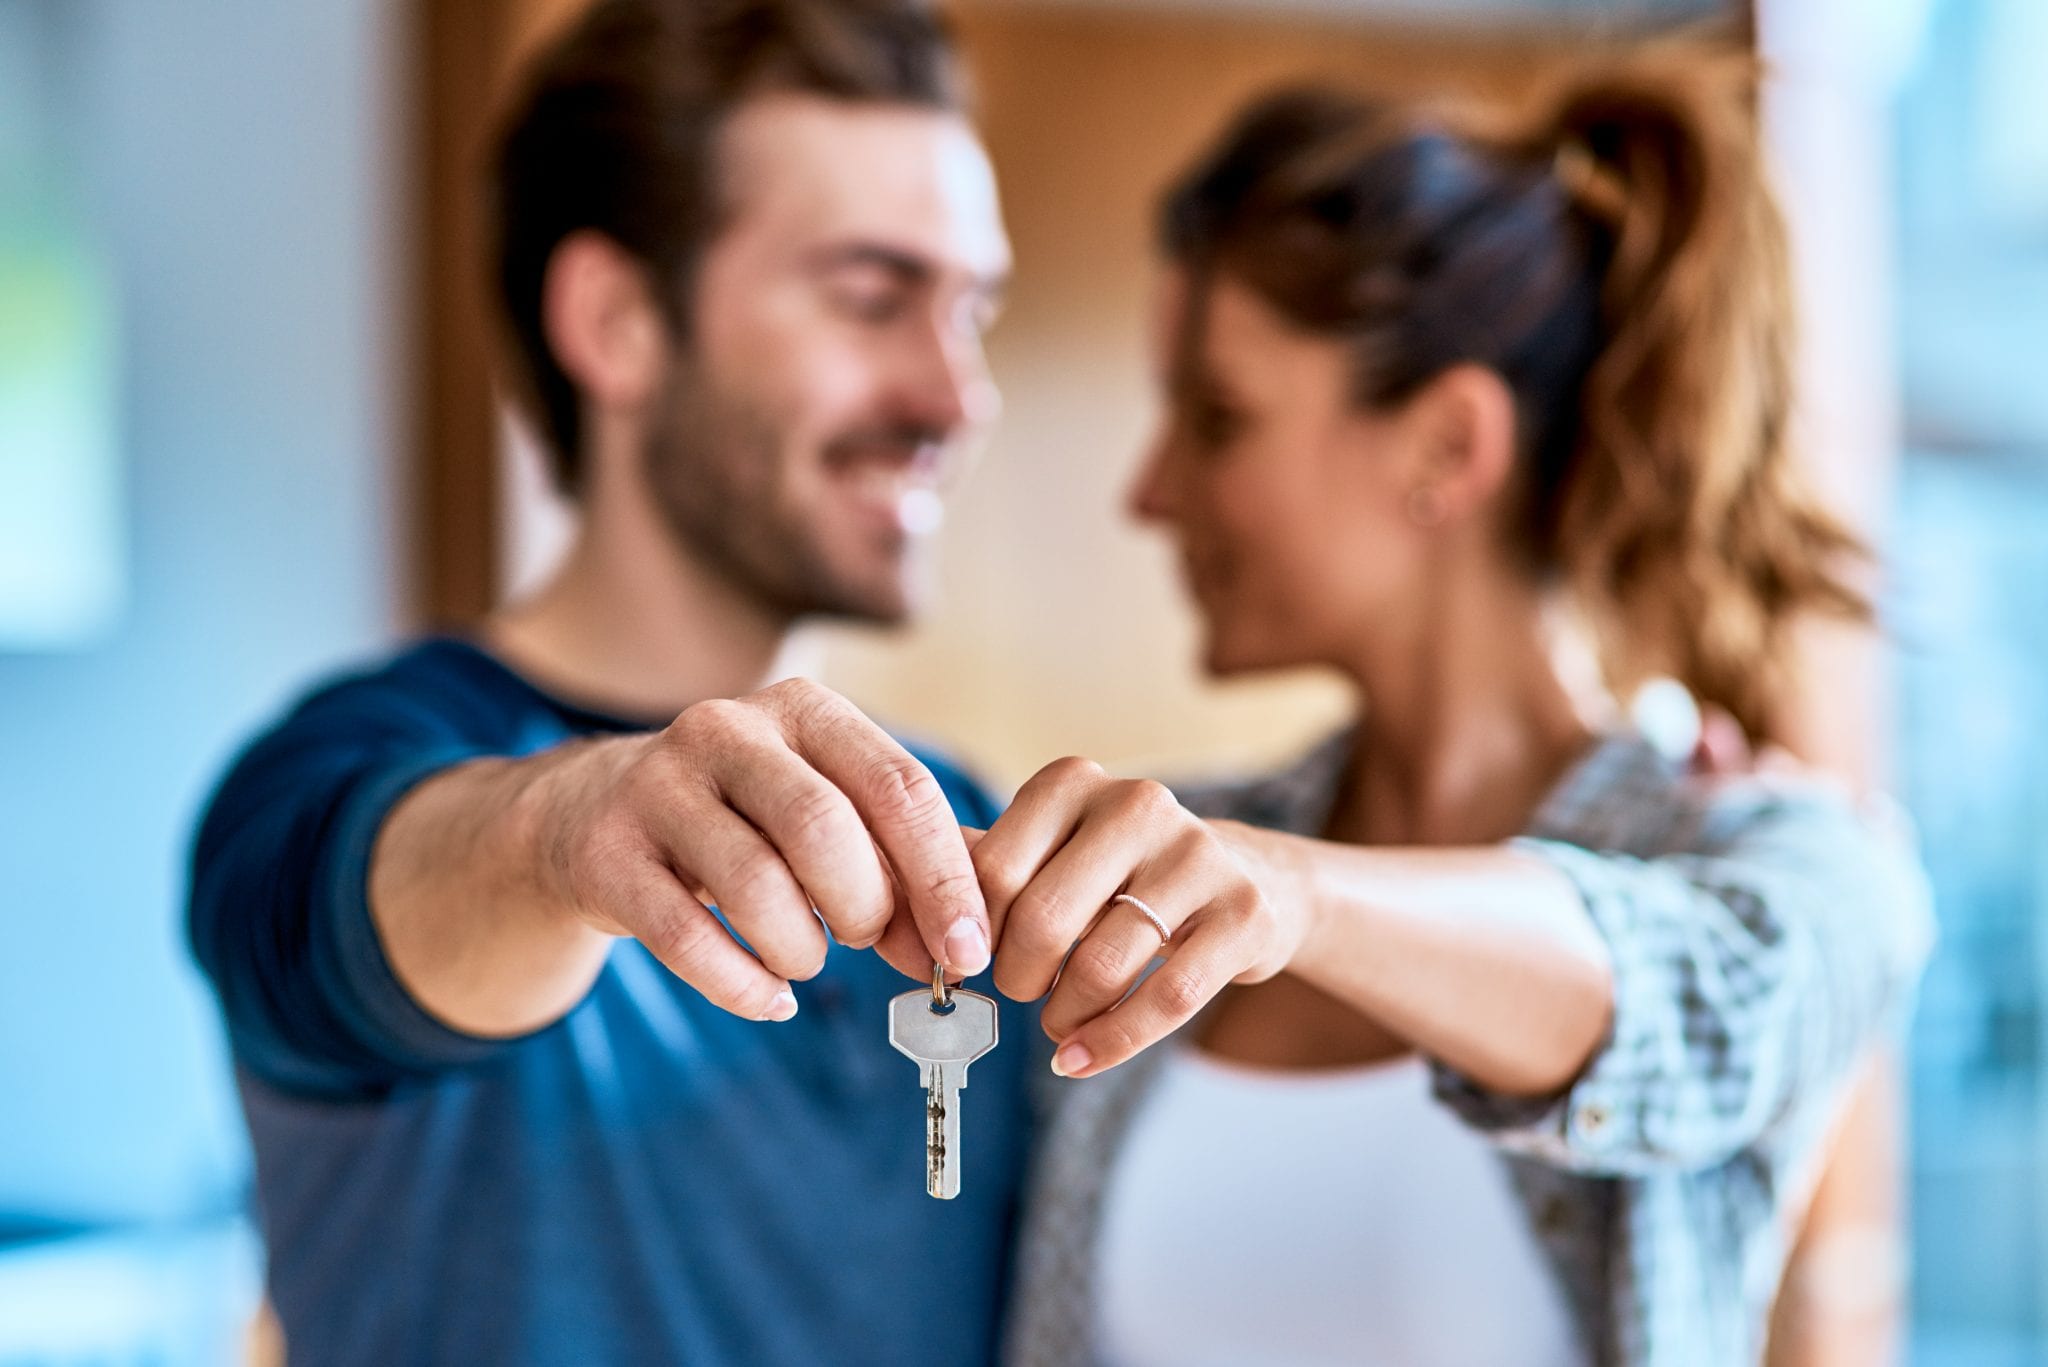 It’s Buy Time: When to Purchase a New Home